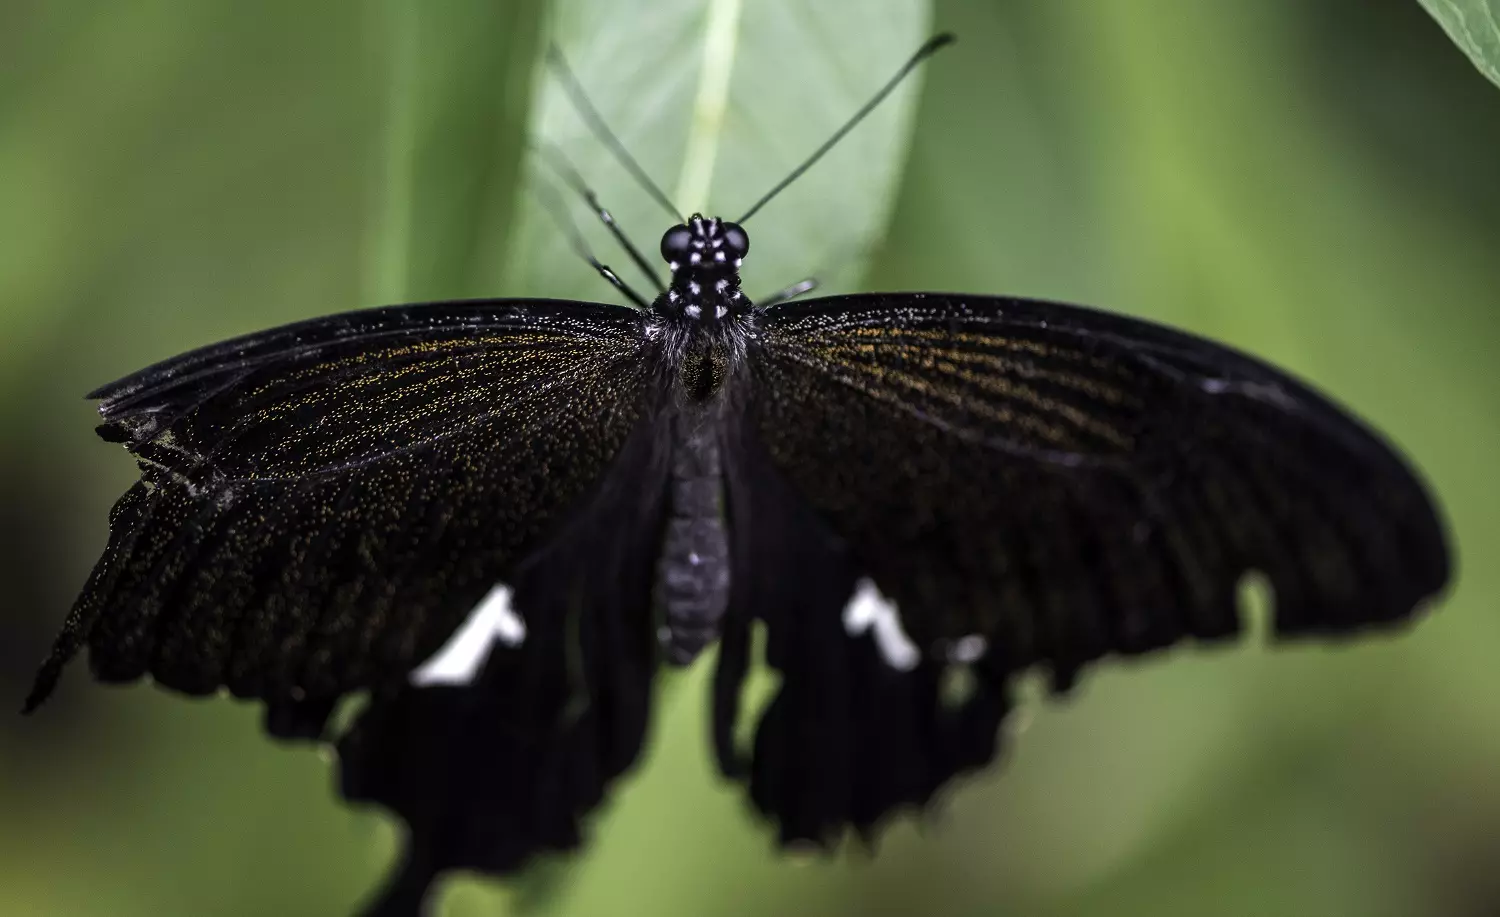 Black butterfly on a leaf, photo credit: Good Free Photos